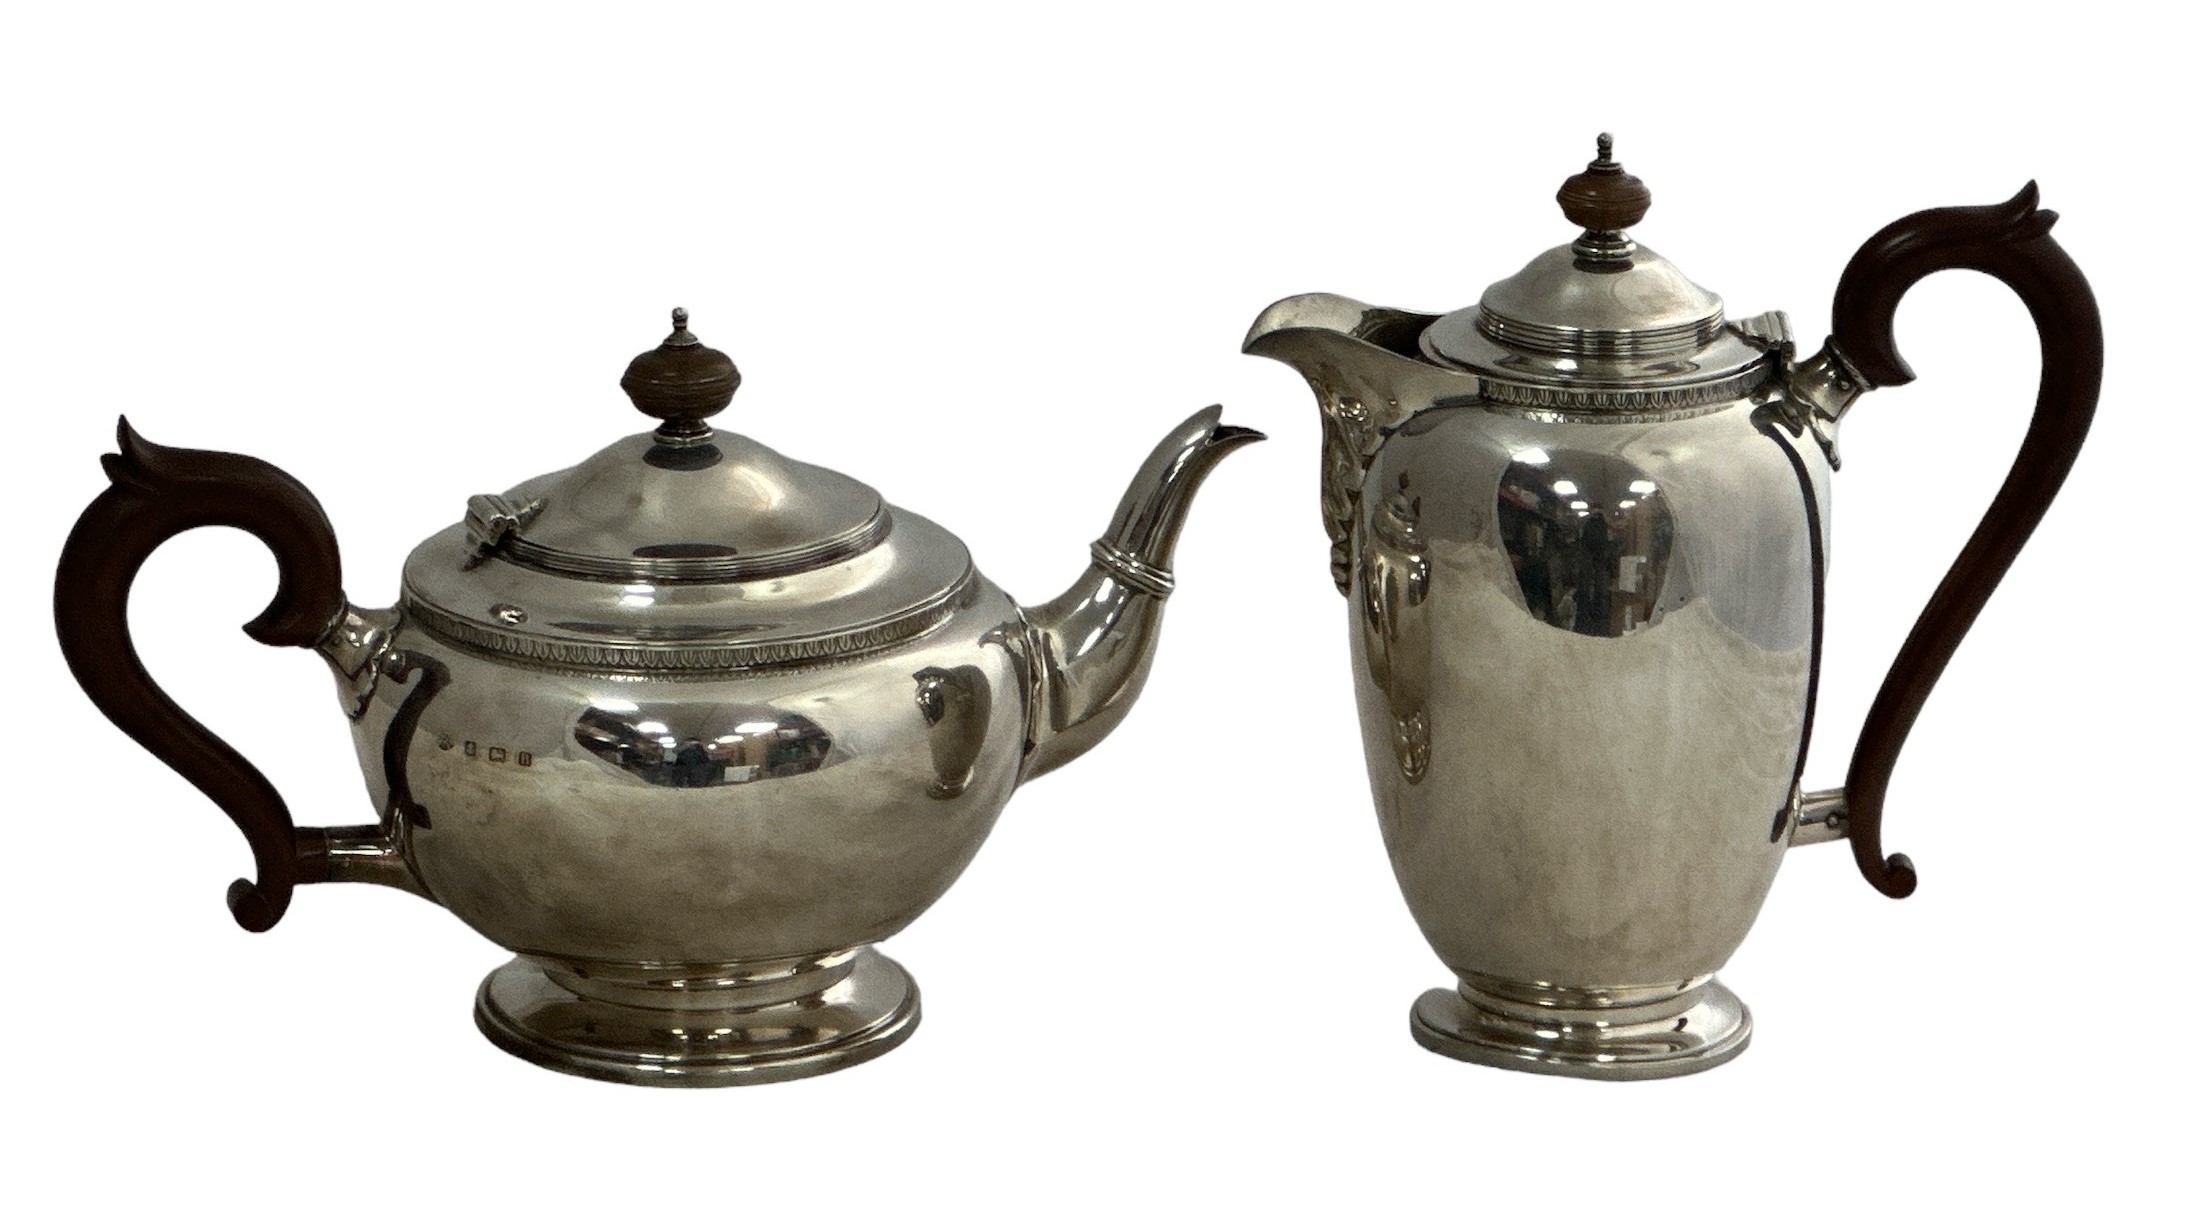 Silver teapot and coffee pot/ hot water pot by Adie Brothers, both with 1926 Birmingham hallmarks. - Image 2 of 2